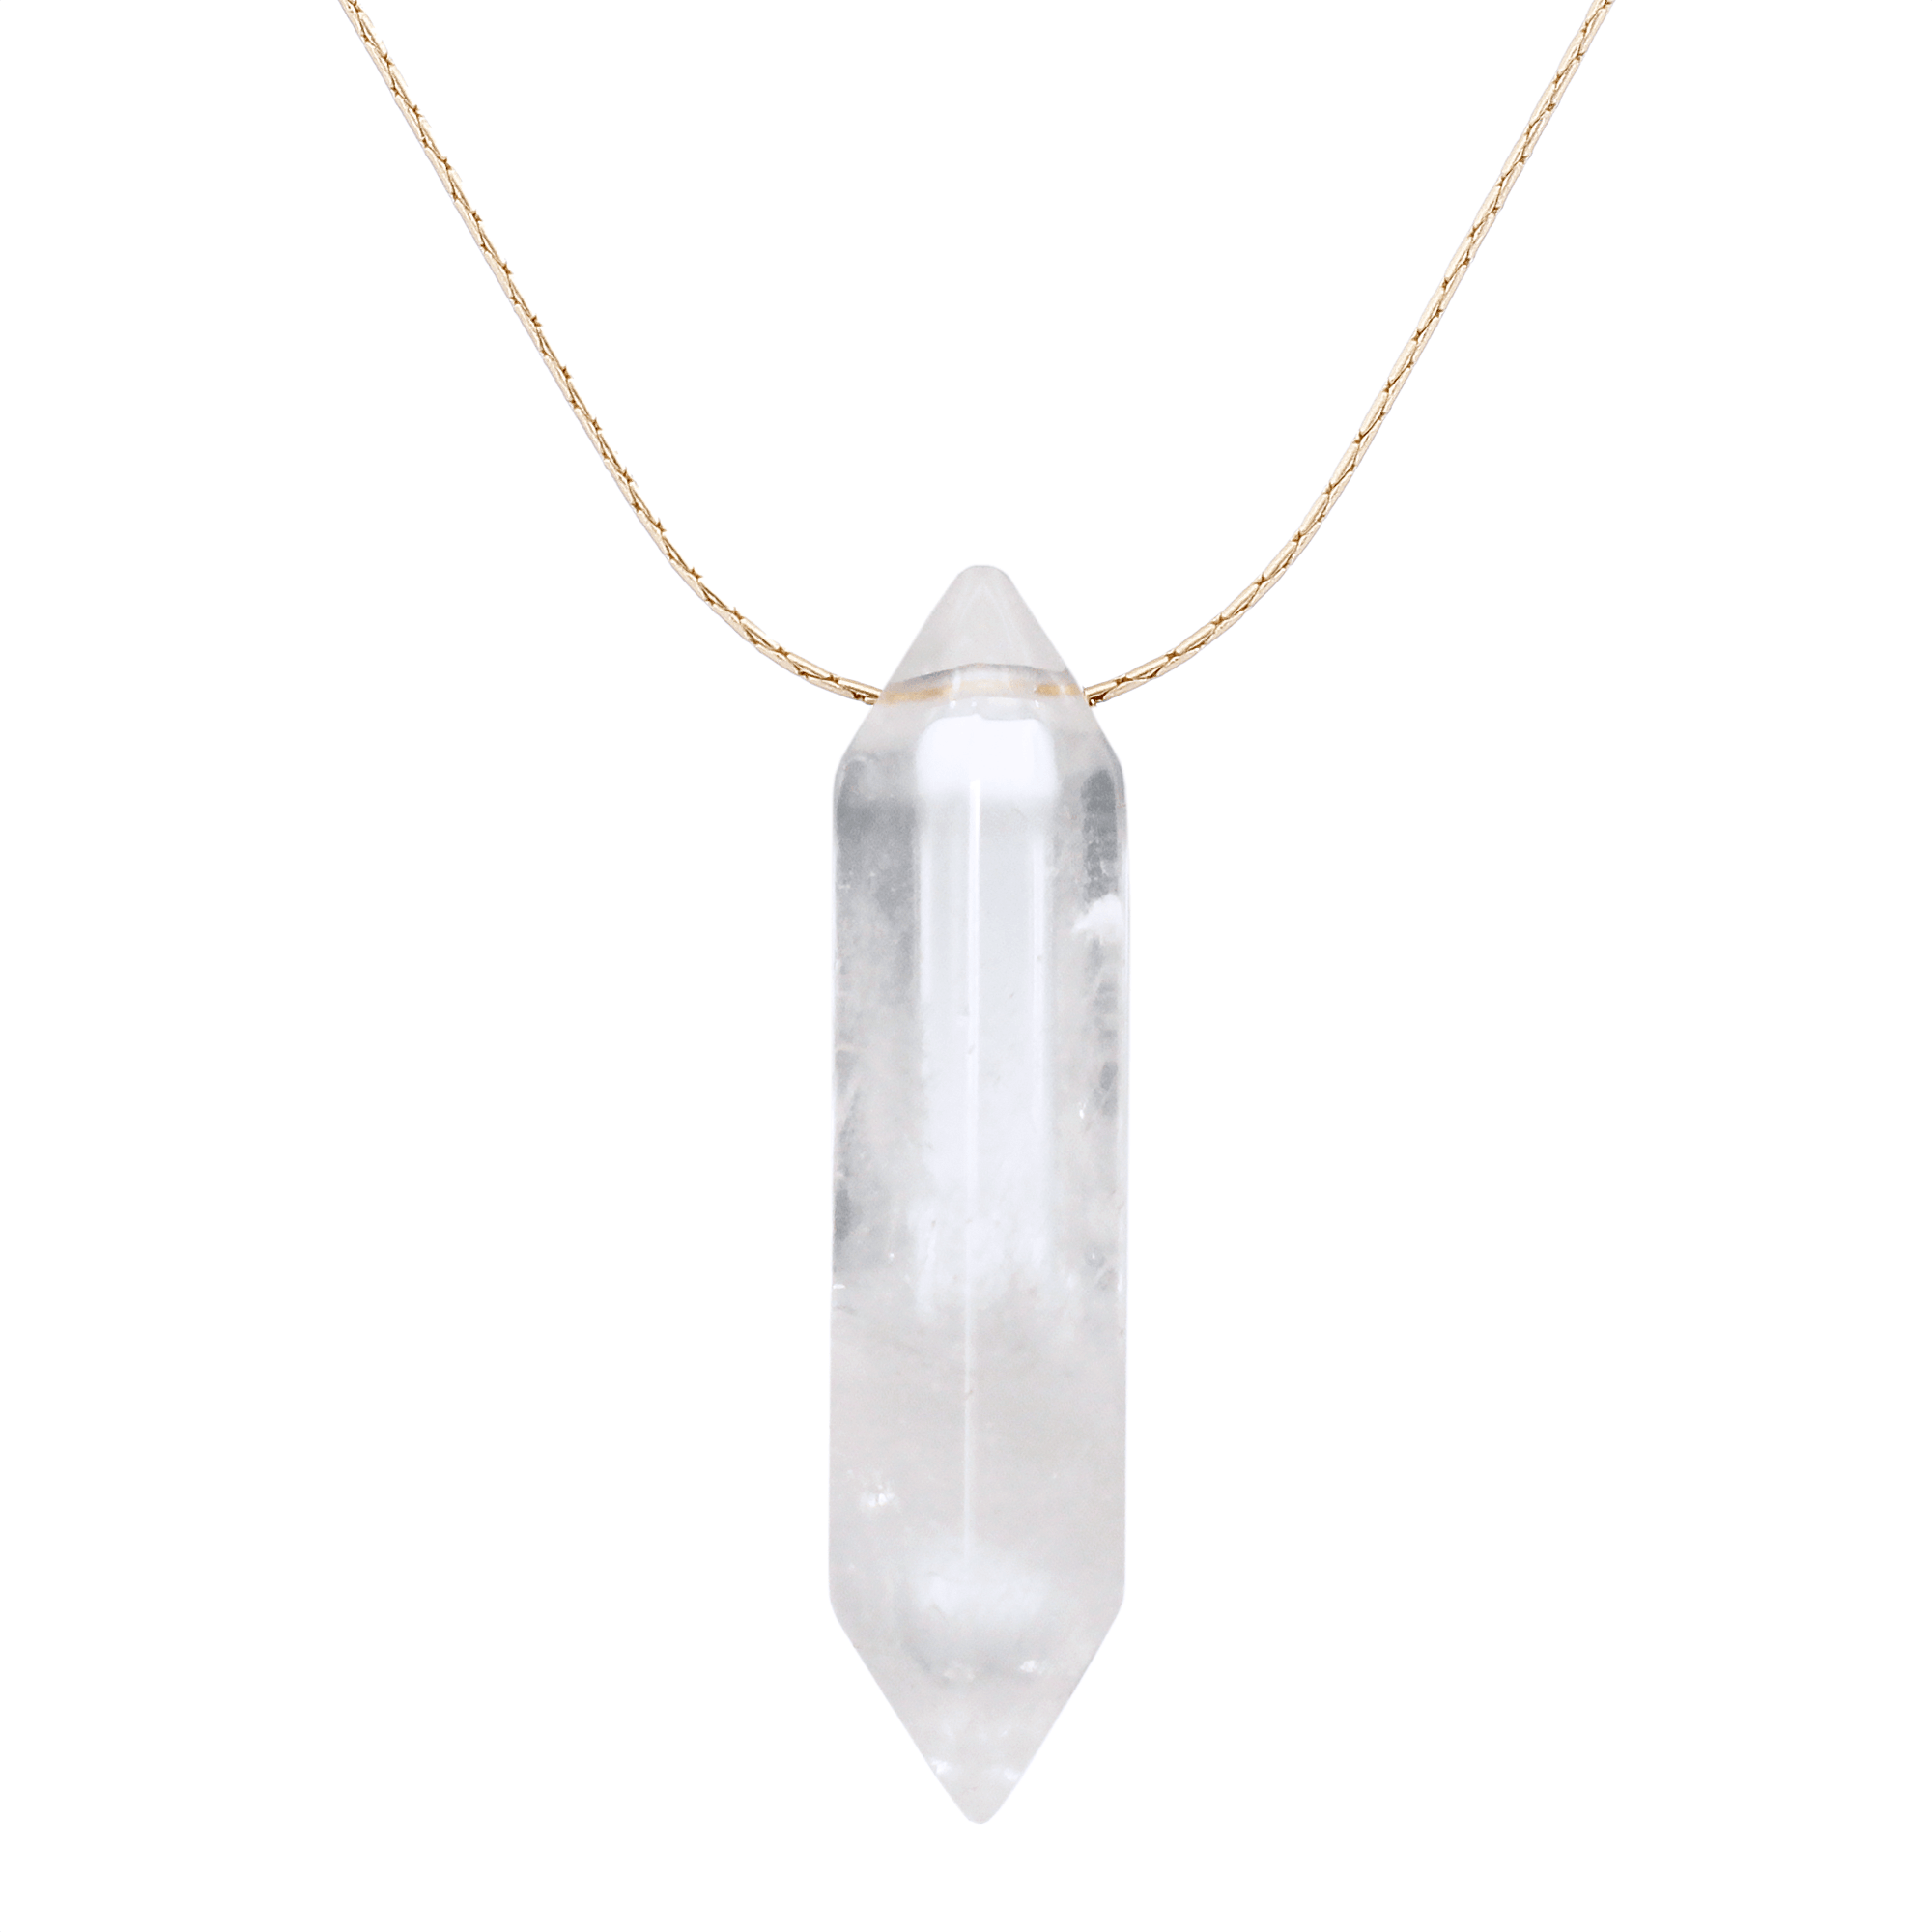 CRYSTAL NECKLACE - ROCK CRYSTAL POINT – The Crystal Avenues